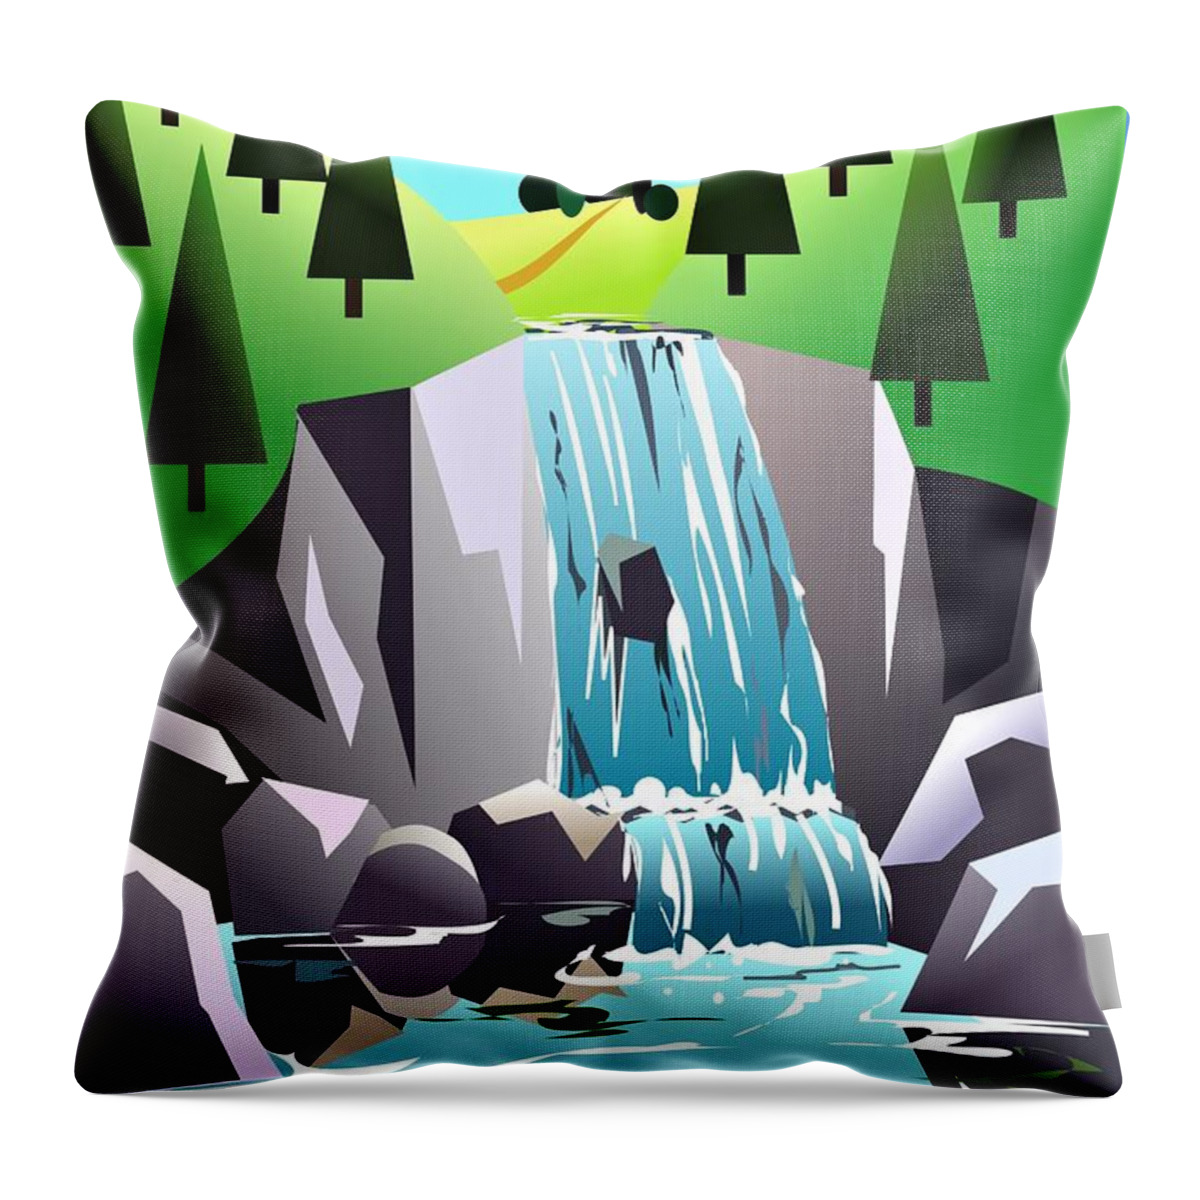 Waterfall Throw Pillow featuring the digital art Waterfall by Fatline Graphic Art